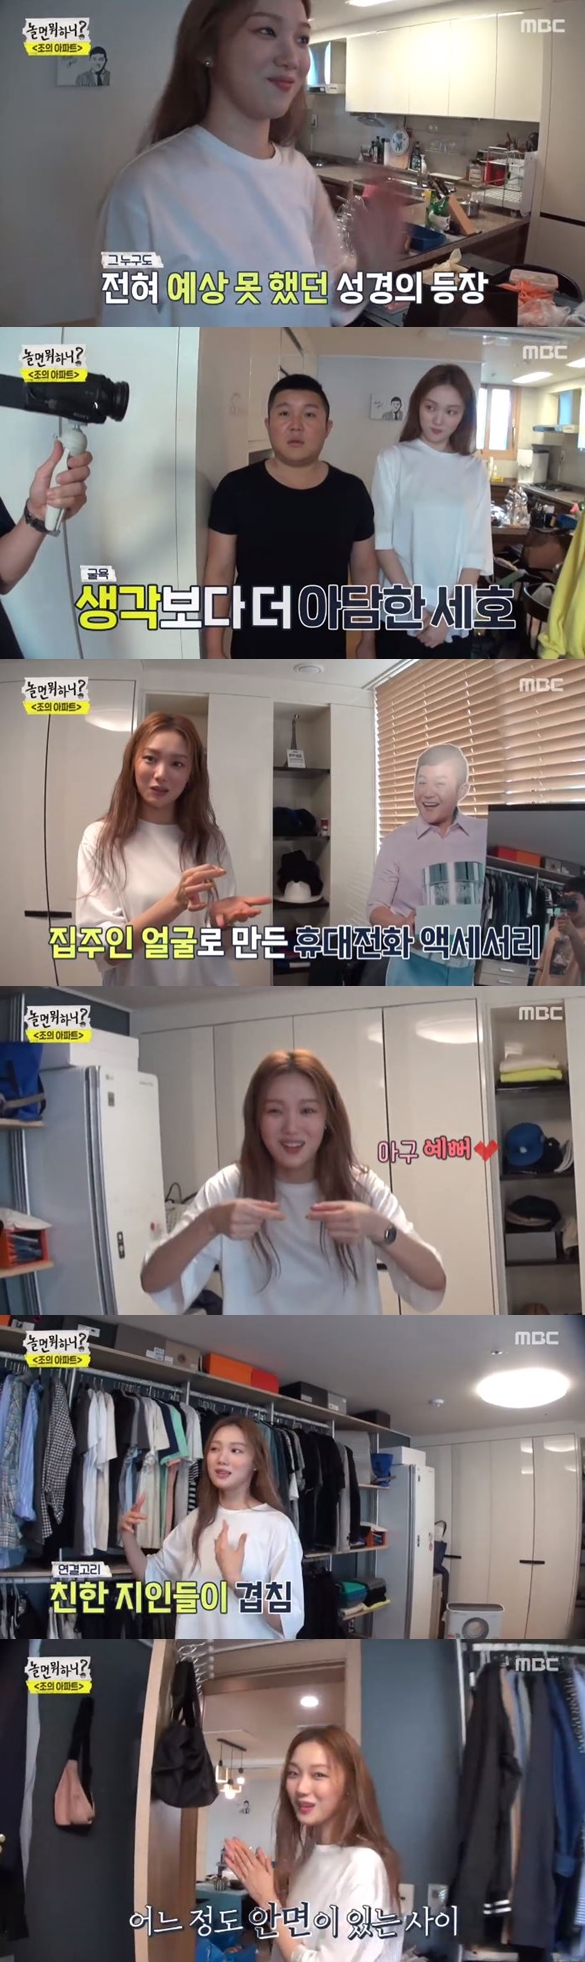 Lee Sung-kyung appeared in Jo Se-ho Partment.MBC entertainment program What do you do when you play broadcasted on the afternoon of the 17th depicted Yang Se-hyeong X Yoo Byung-jae X Taehangho X Irene taking four Cameras and shooting.Yang Se-hyeong, Yoo Byung-jae, Taehangho and Irene, who took over Camera as the winner, gathered at Jo Se-ho Apartment after agonizing.Members of the New Community Club gathered at Jo Se-ho Partment to prepare a new project.In the appearance of Lee Kyu-hyung, members including Yunho Yunho expressed their welcome.Then Lee Sung-kyung appeared and the members could not hide their joy, and Jo Se-ho laughed with a smile.Lee Sung-kyung made members laugh as he showed a youthful appearance while playing Jo Se-ho house.On the other hand, What do you do when you play is a relay Camera that started with Camera to Yoo Jae-Suk, who usually says Hangout with Yoo on a scheduleless day.Its a variety of stories with unexpected characters in Camera, going through countless people: every Saturday at 6:30 p.m.